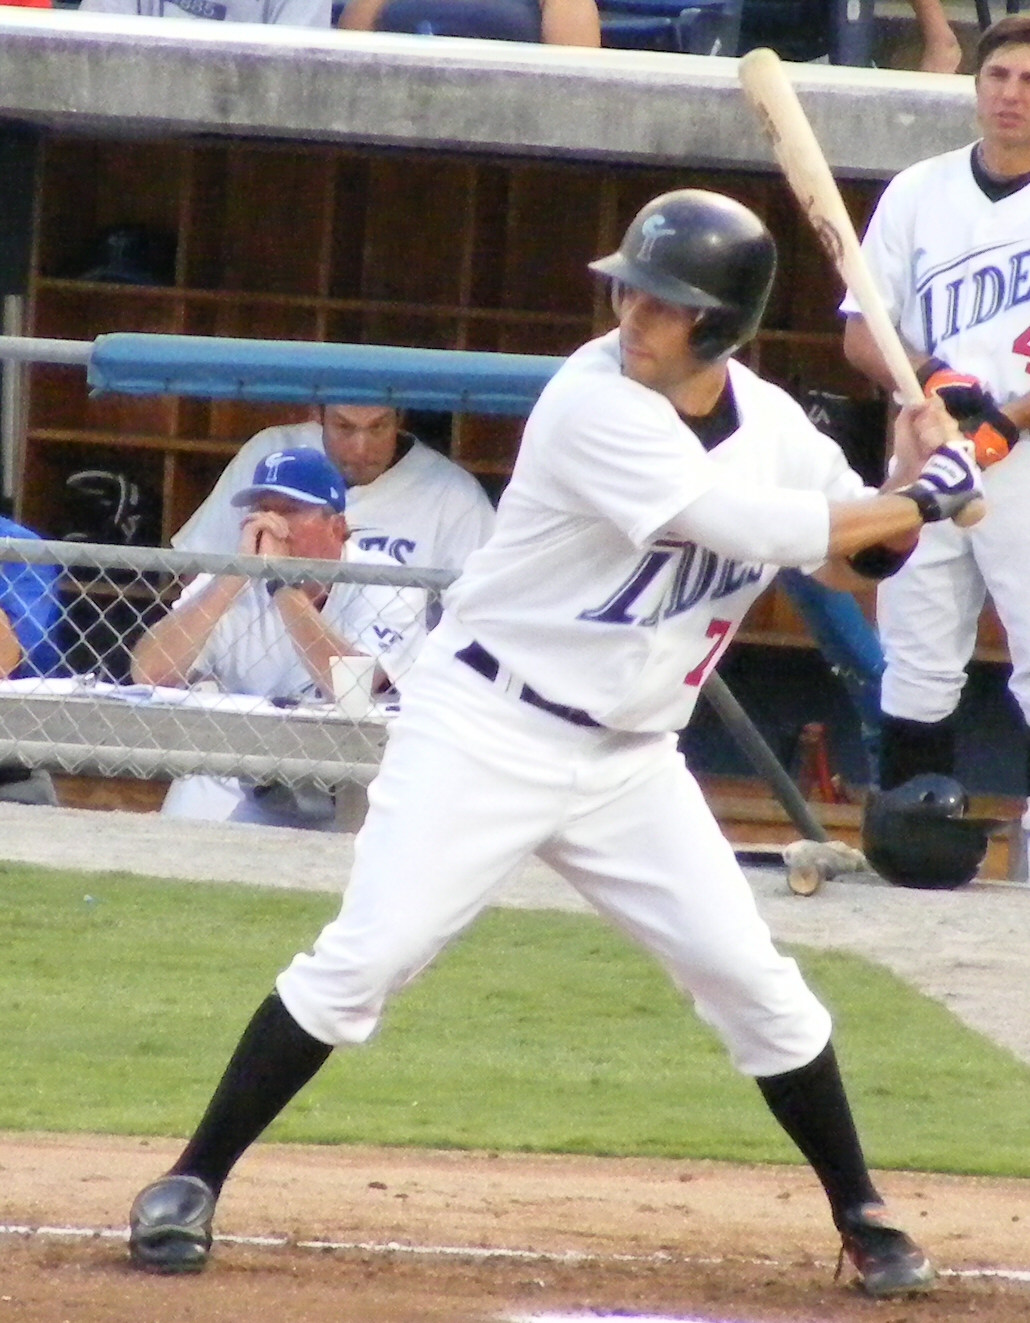 Stern with the Norfolk Tides